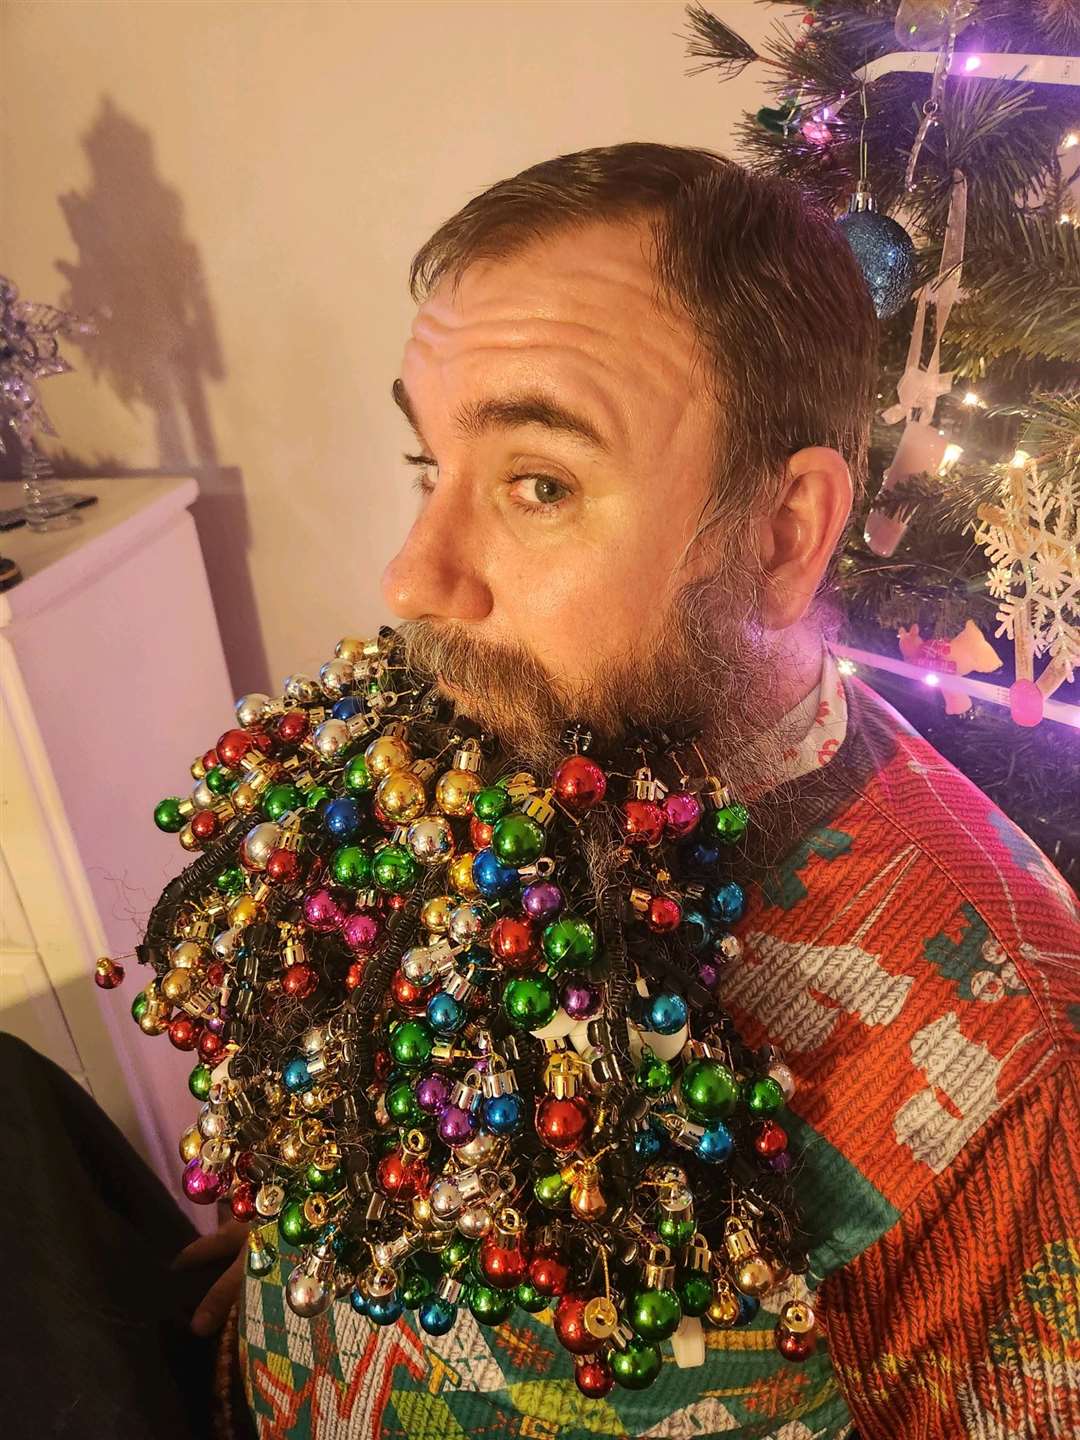 Joel Strasser attached 710 baubles to his beard, a world record (Guinness World Records/PA)